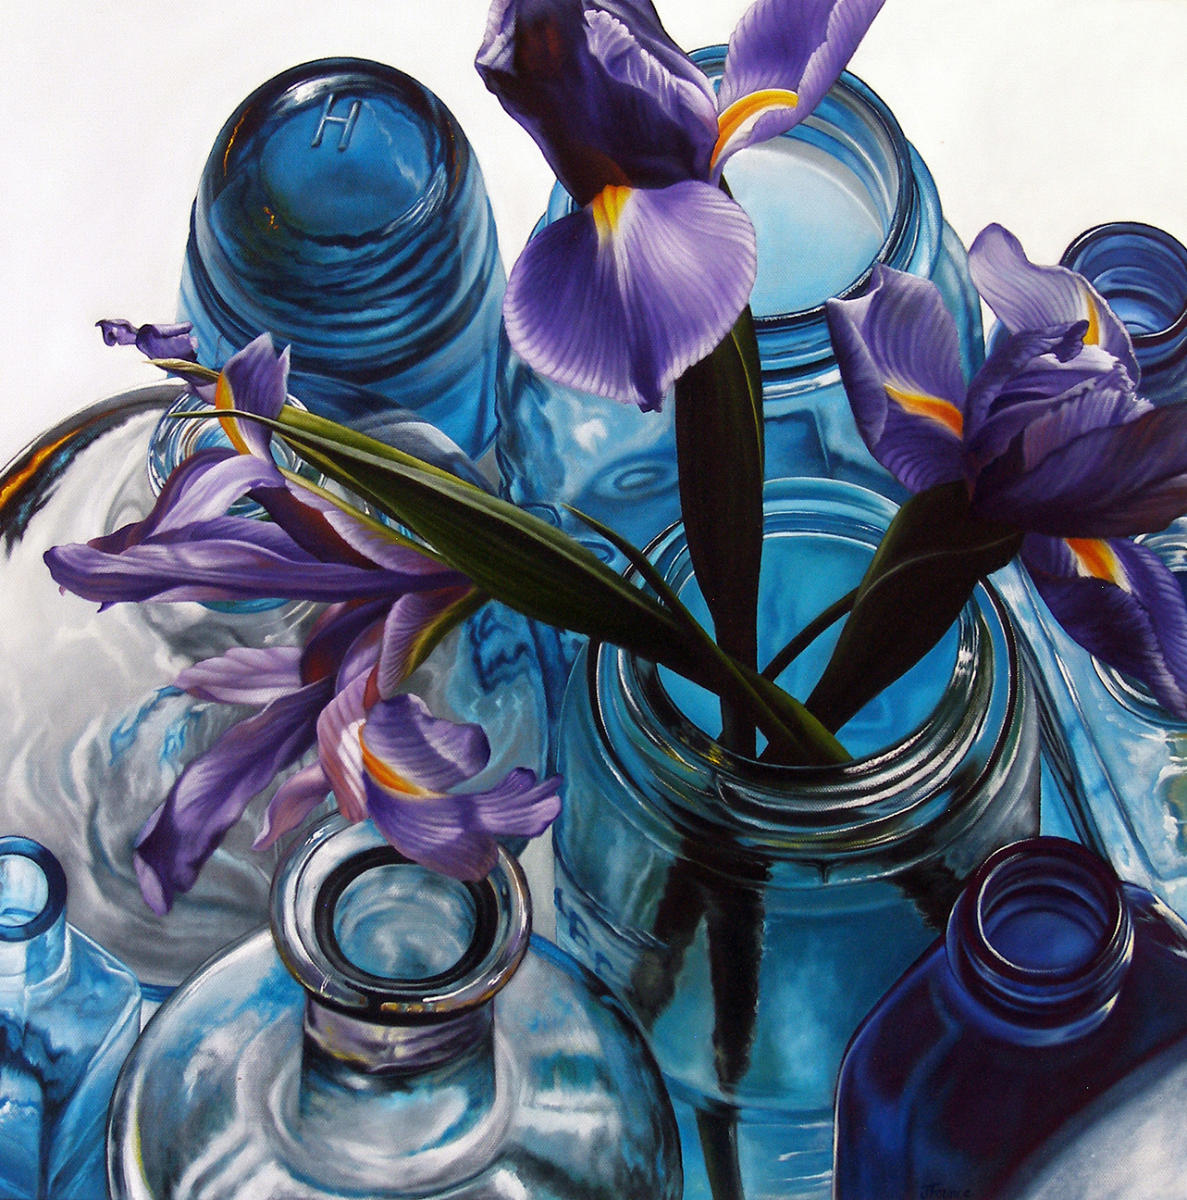 PURPLE & BLUE - 20"x20" - OIL ON CANVAS - PRIVATE COLLECTION